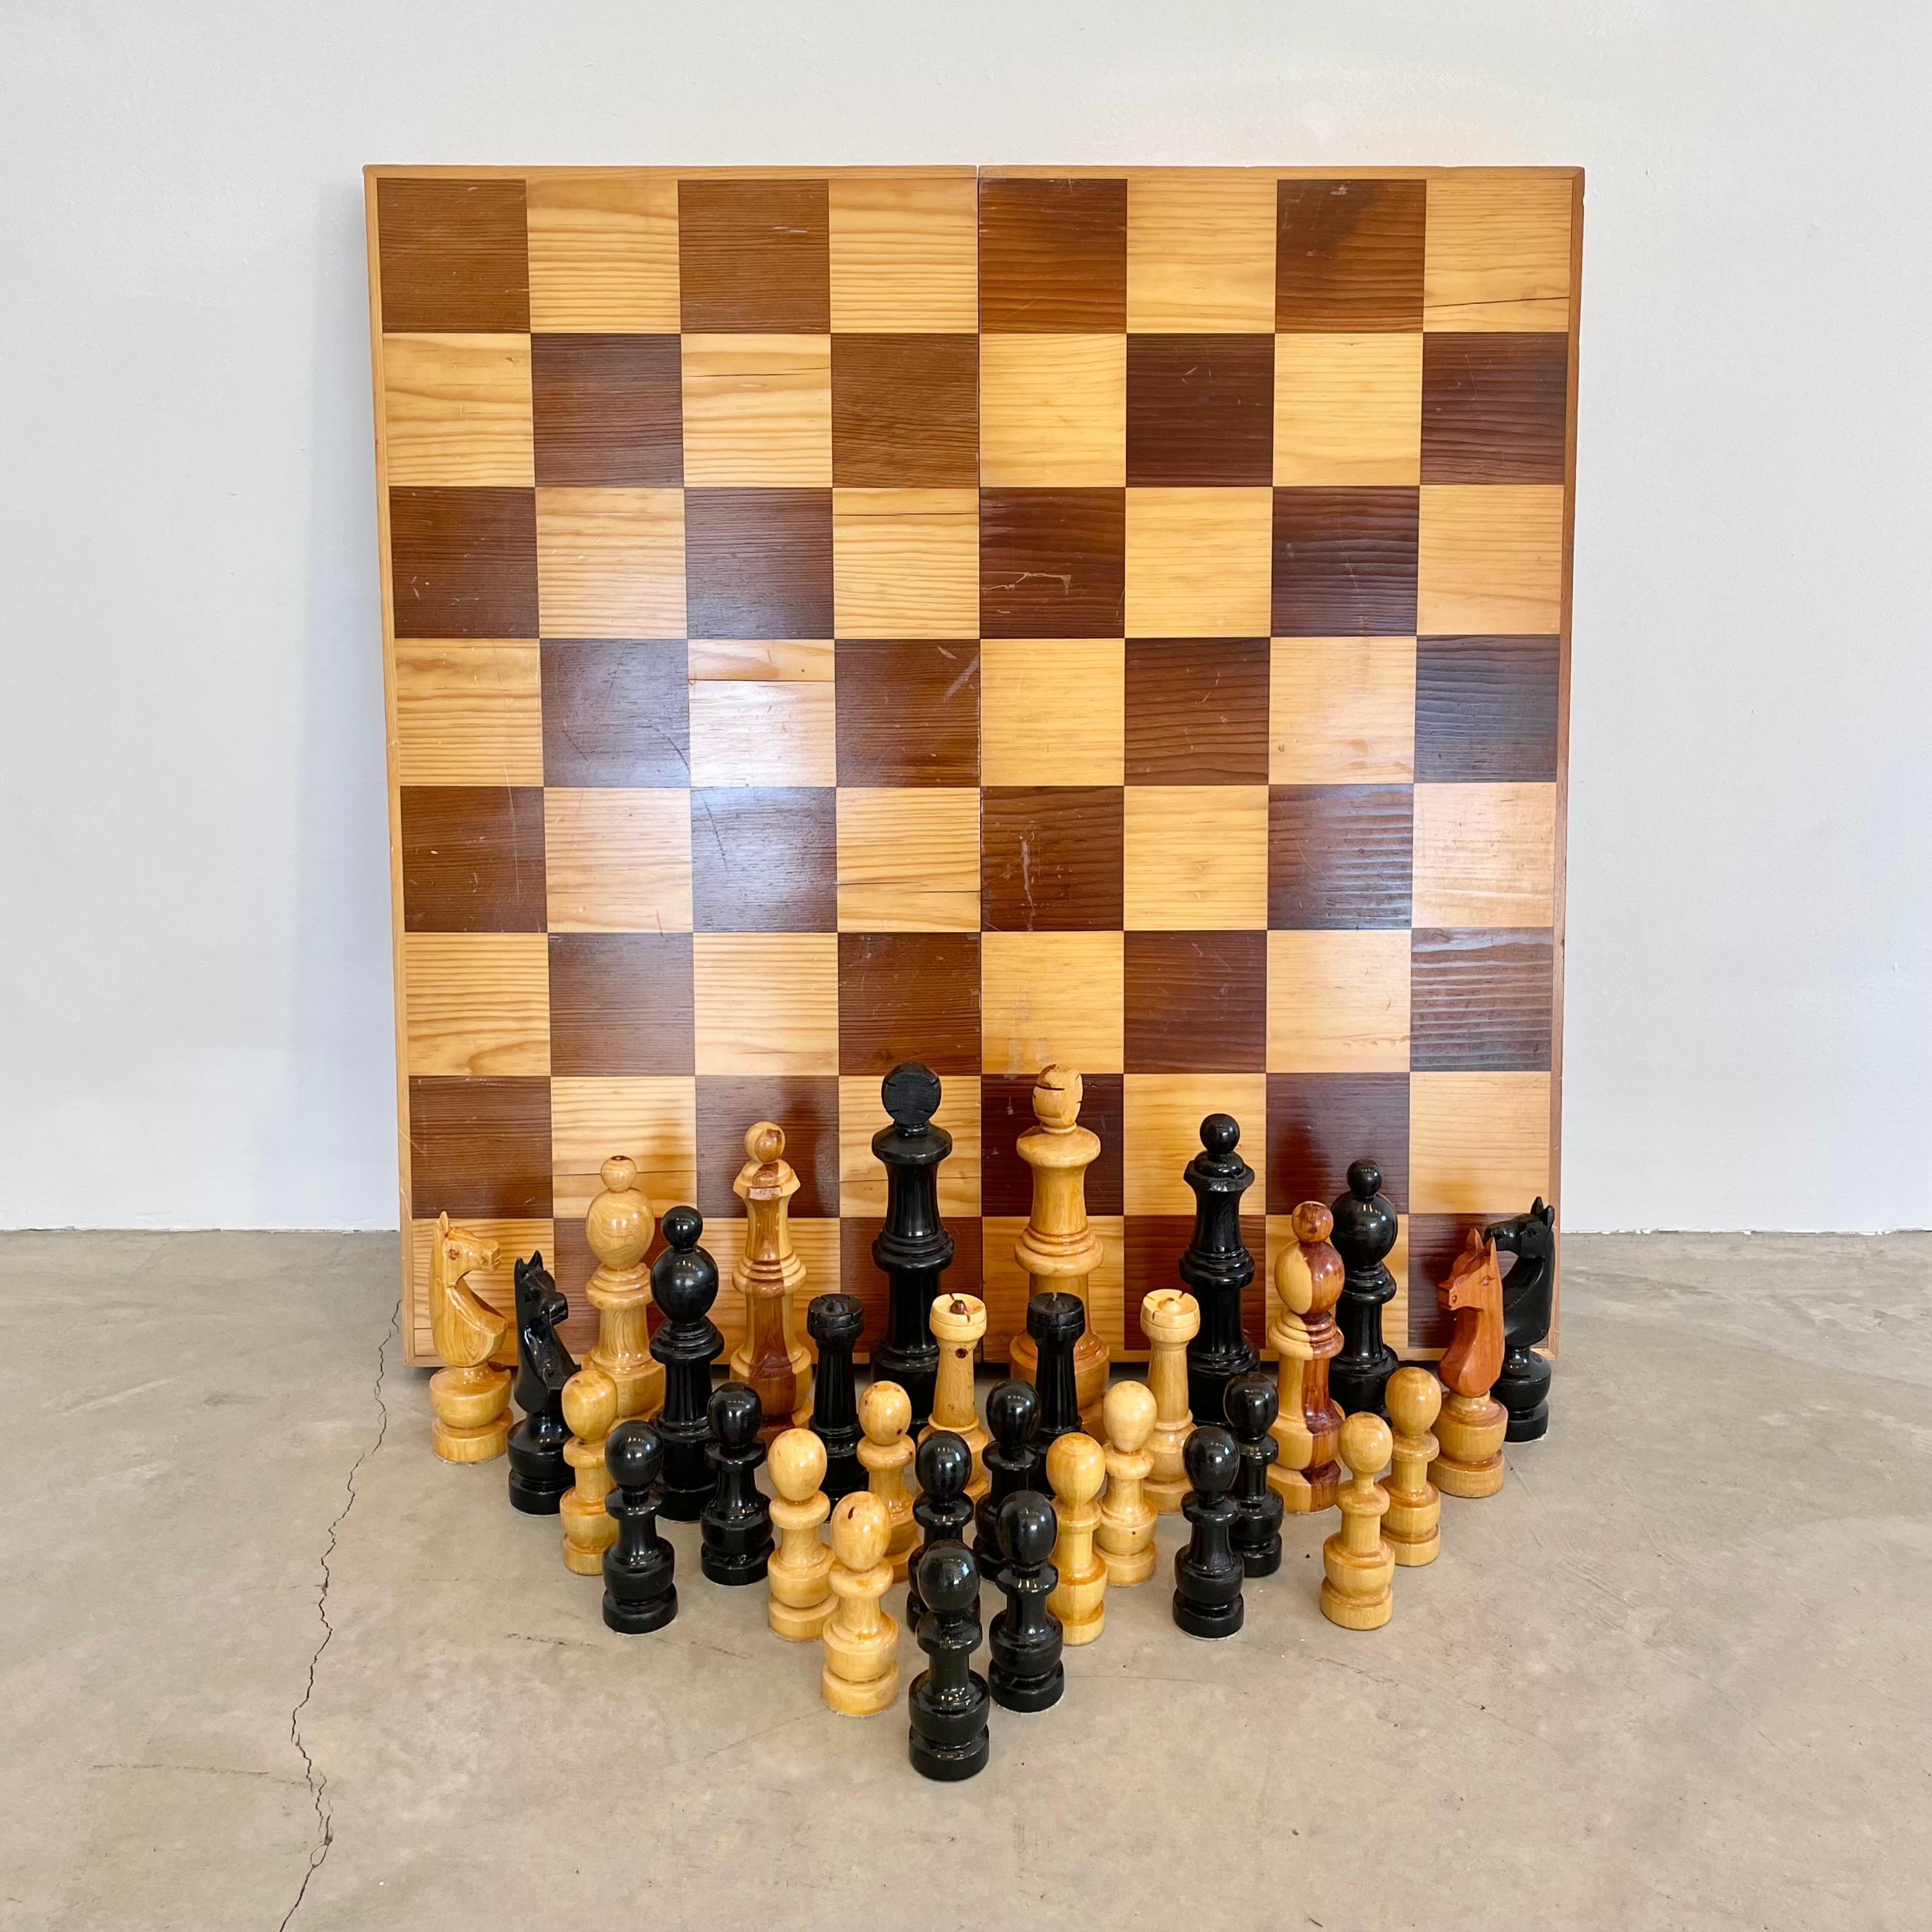 Large oversized folding wooden chess set made in the USSR in the 1980s. Box unfolds into chess board. Good condition with nice surface patination on board. Great tabletop set and able to be transported. Wear as shown. 

For reference, size of King